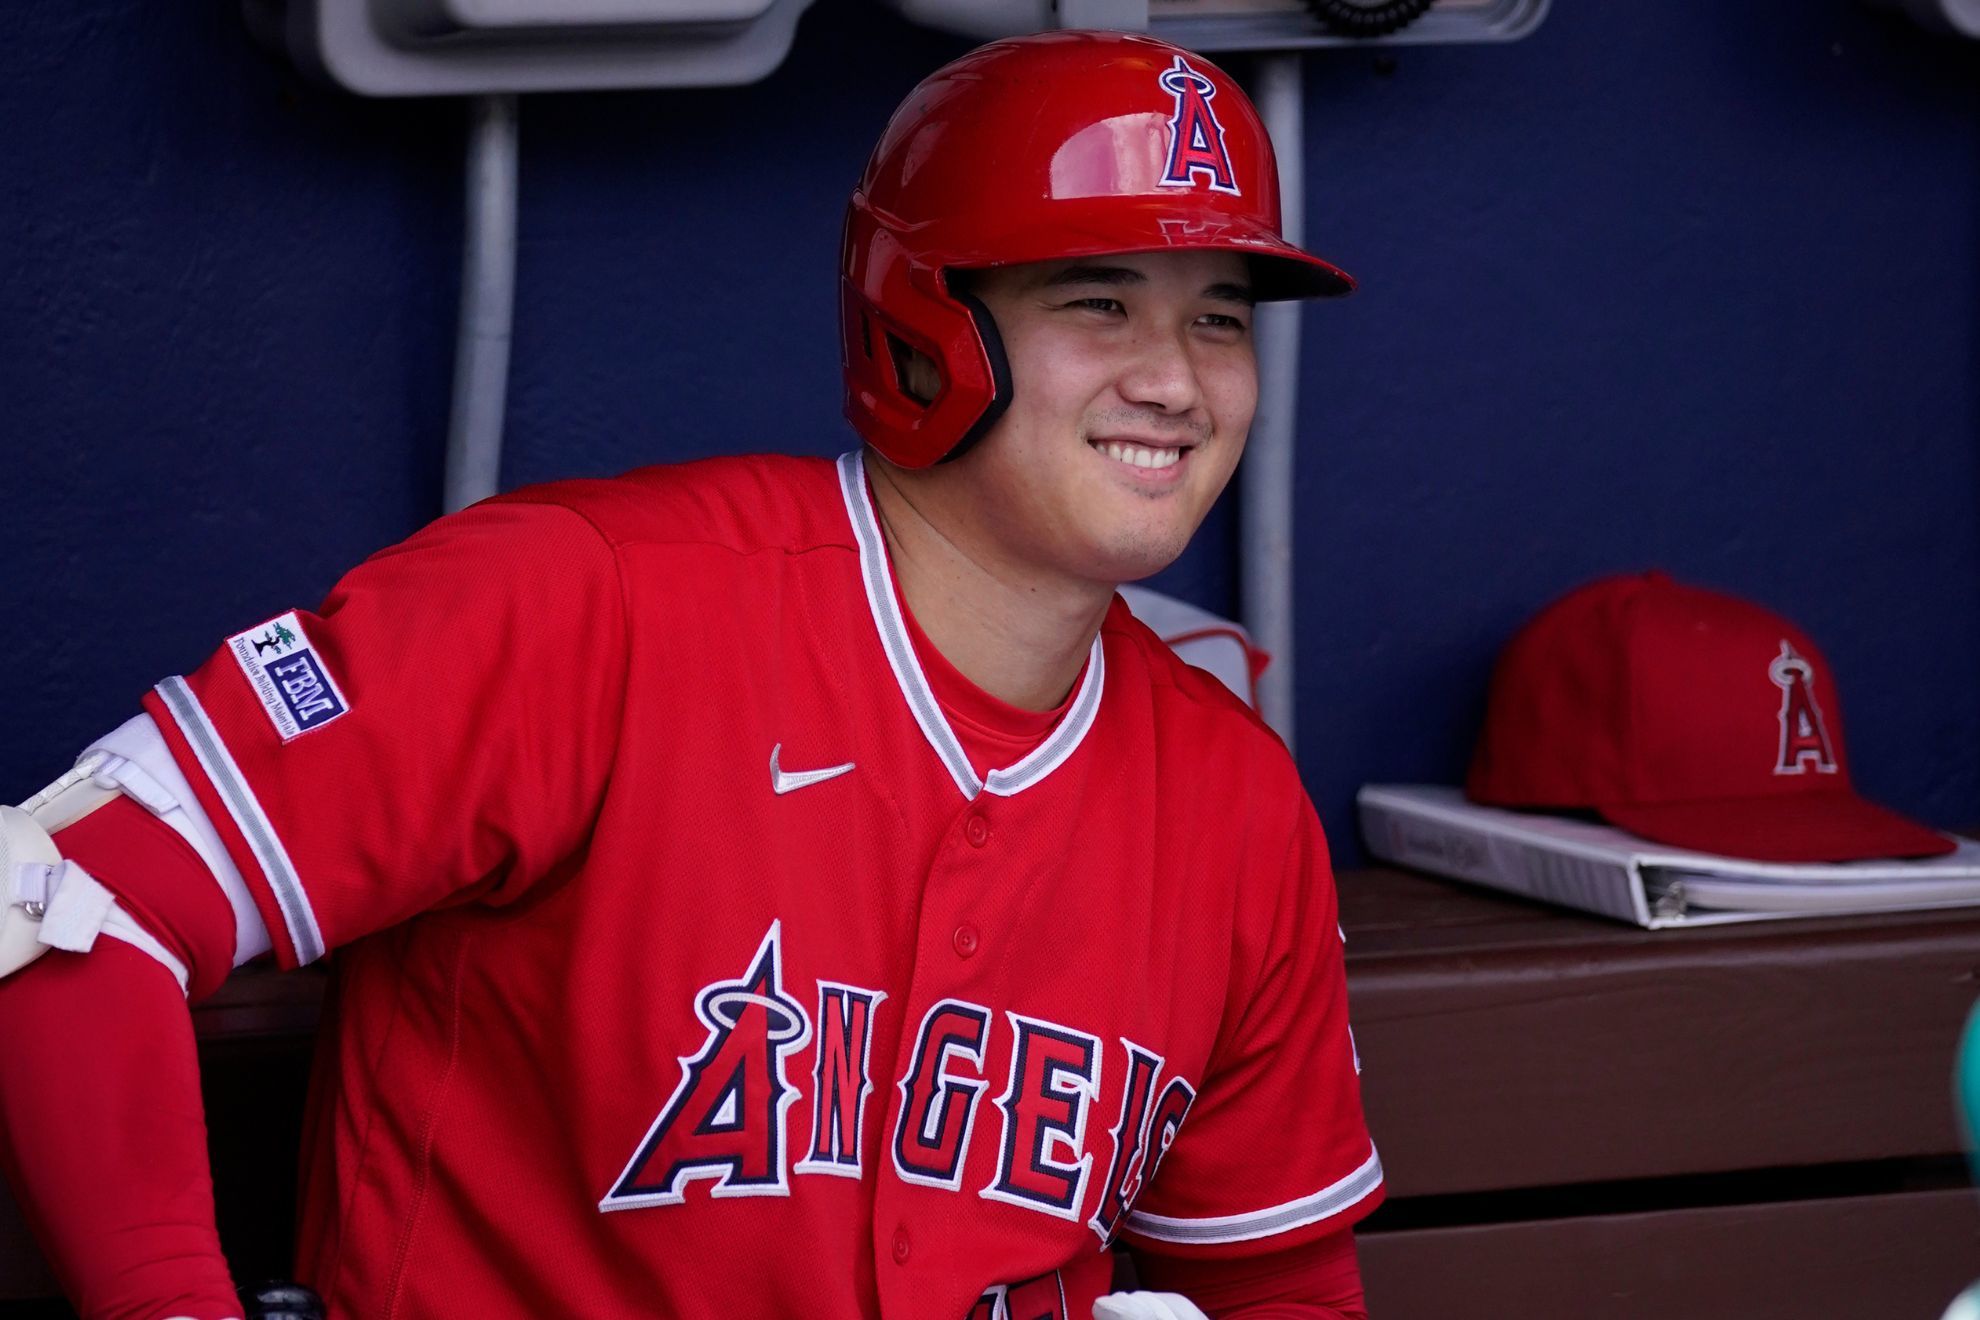 MLB teams bidding for free agent Shohei Ohtani will likely reach $600 million